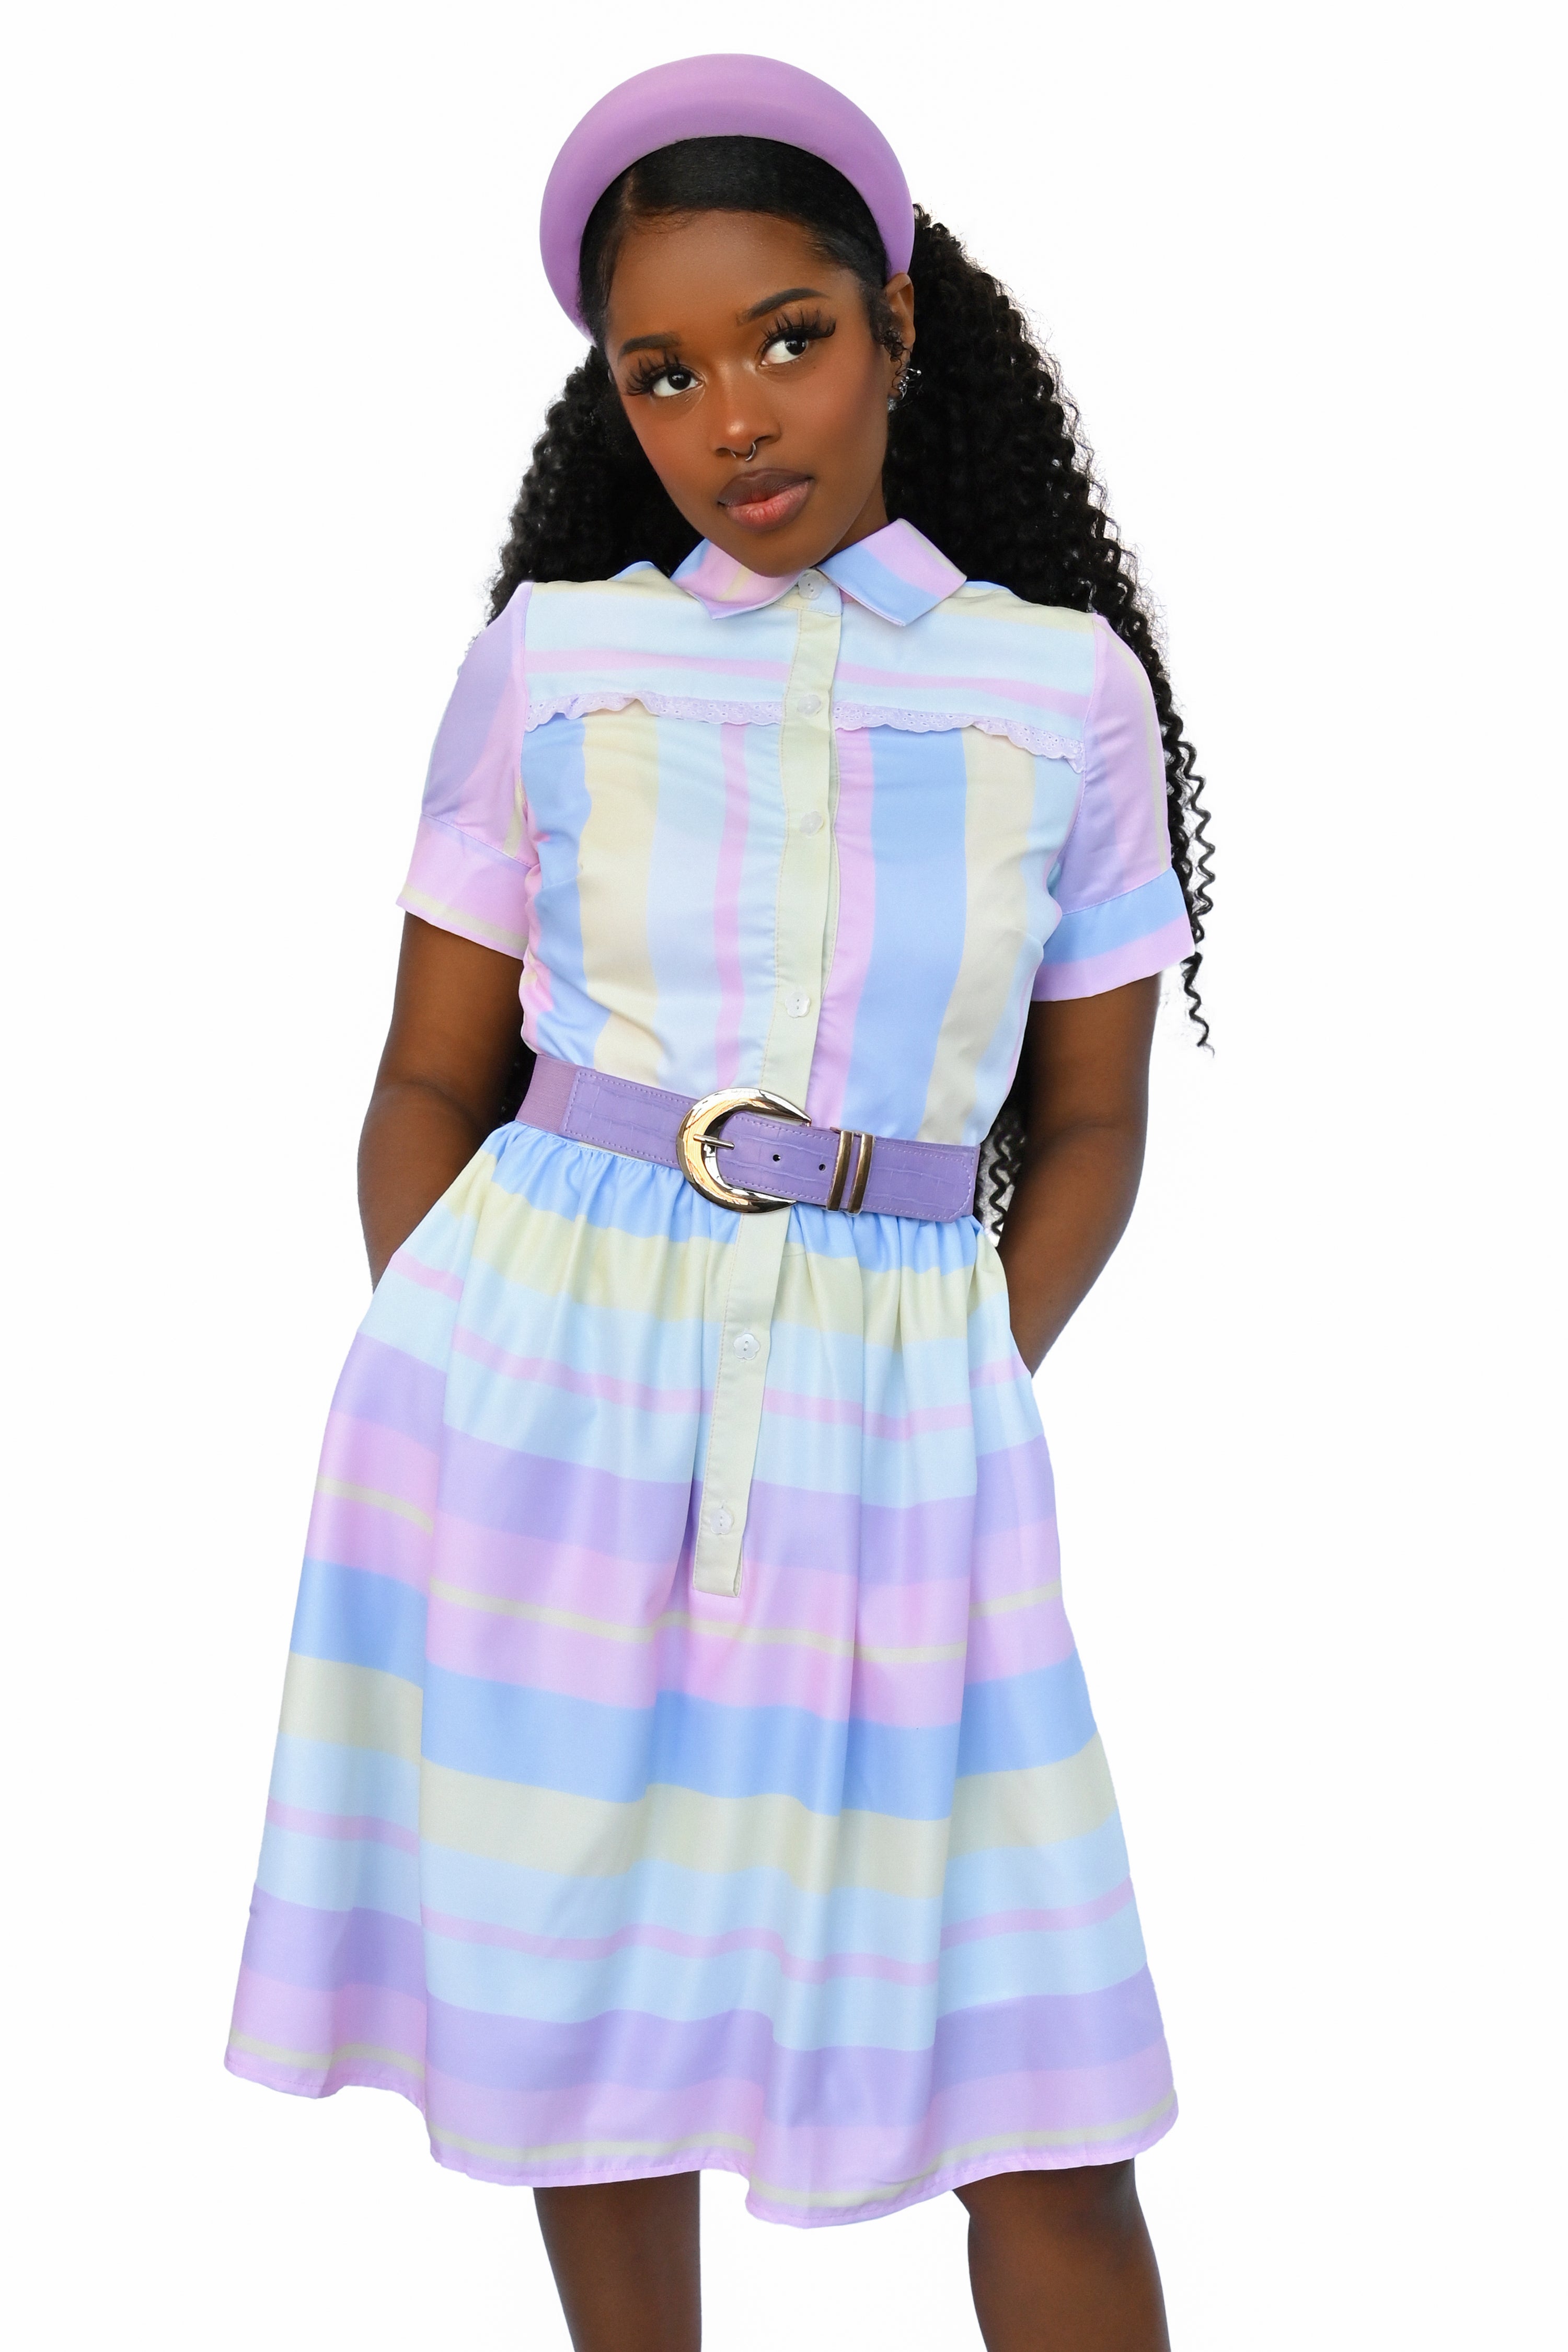 pastel striped button up dress with pointed collar, white flower buttons, and pink eyelet lace trim detail across the chest. Colours are: Pink, Purple, Light Blue, Yellow, Light Indigo. Vertical stripes on the top portion, horizontal on the lower half